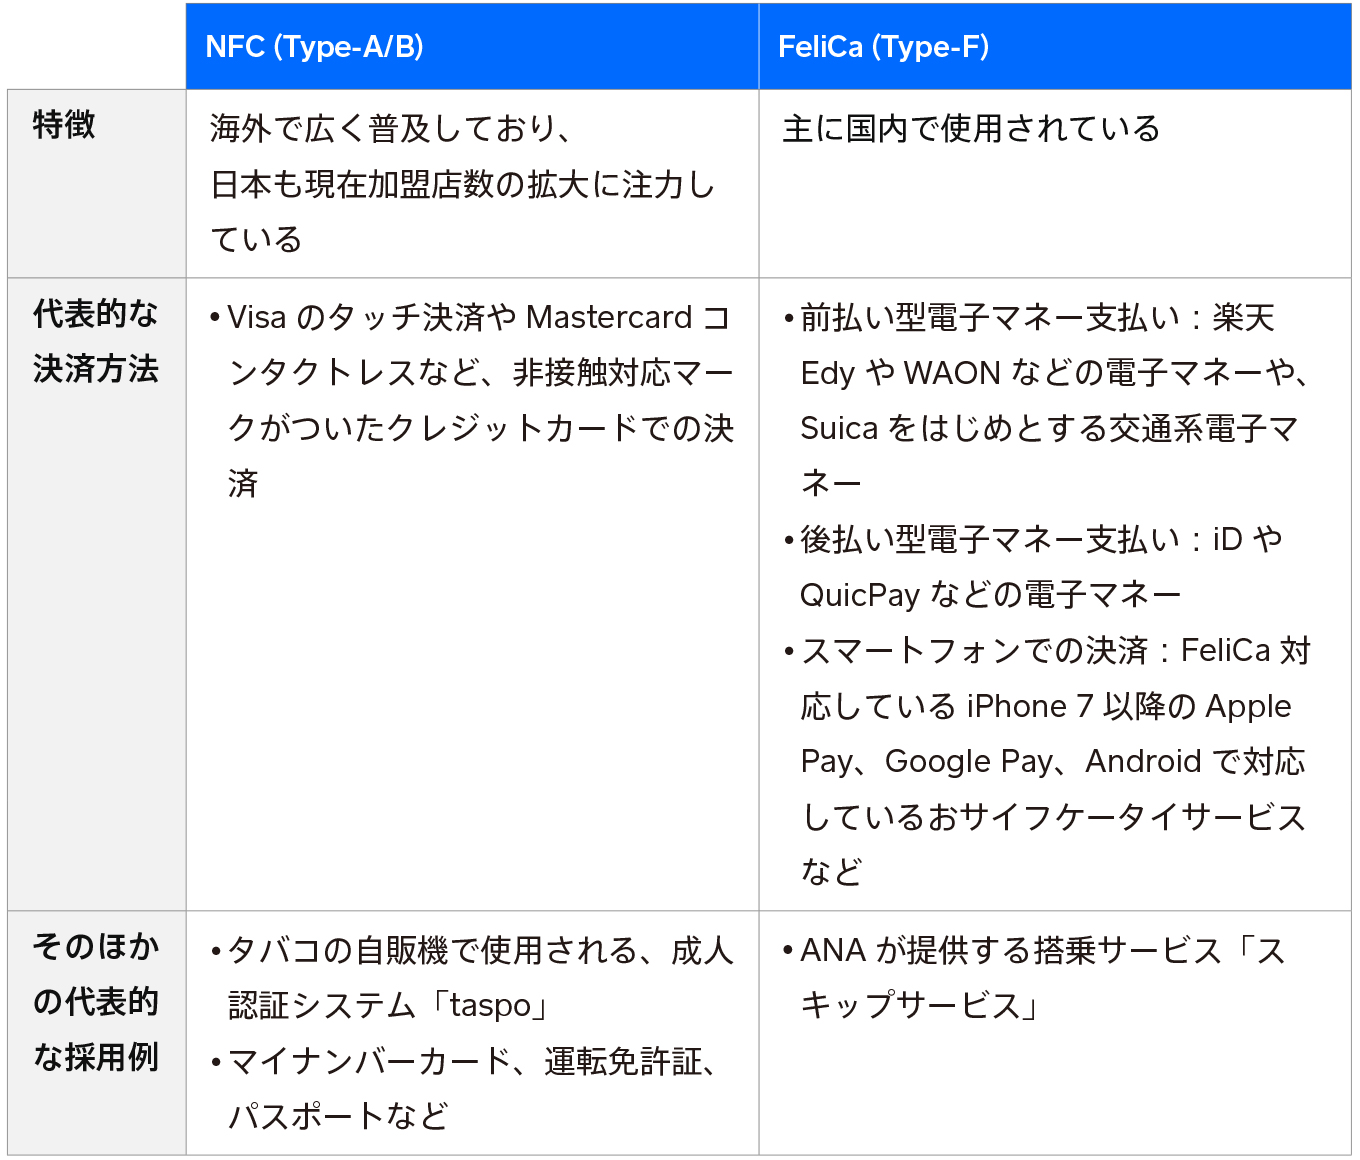 jp-blog-what-is-nfc-payment history typeabf